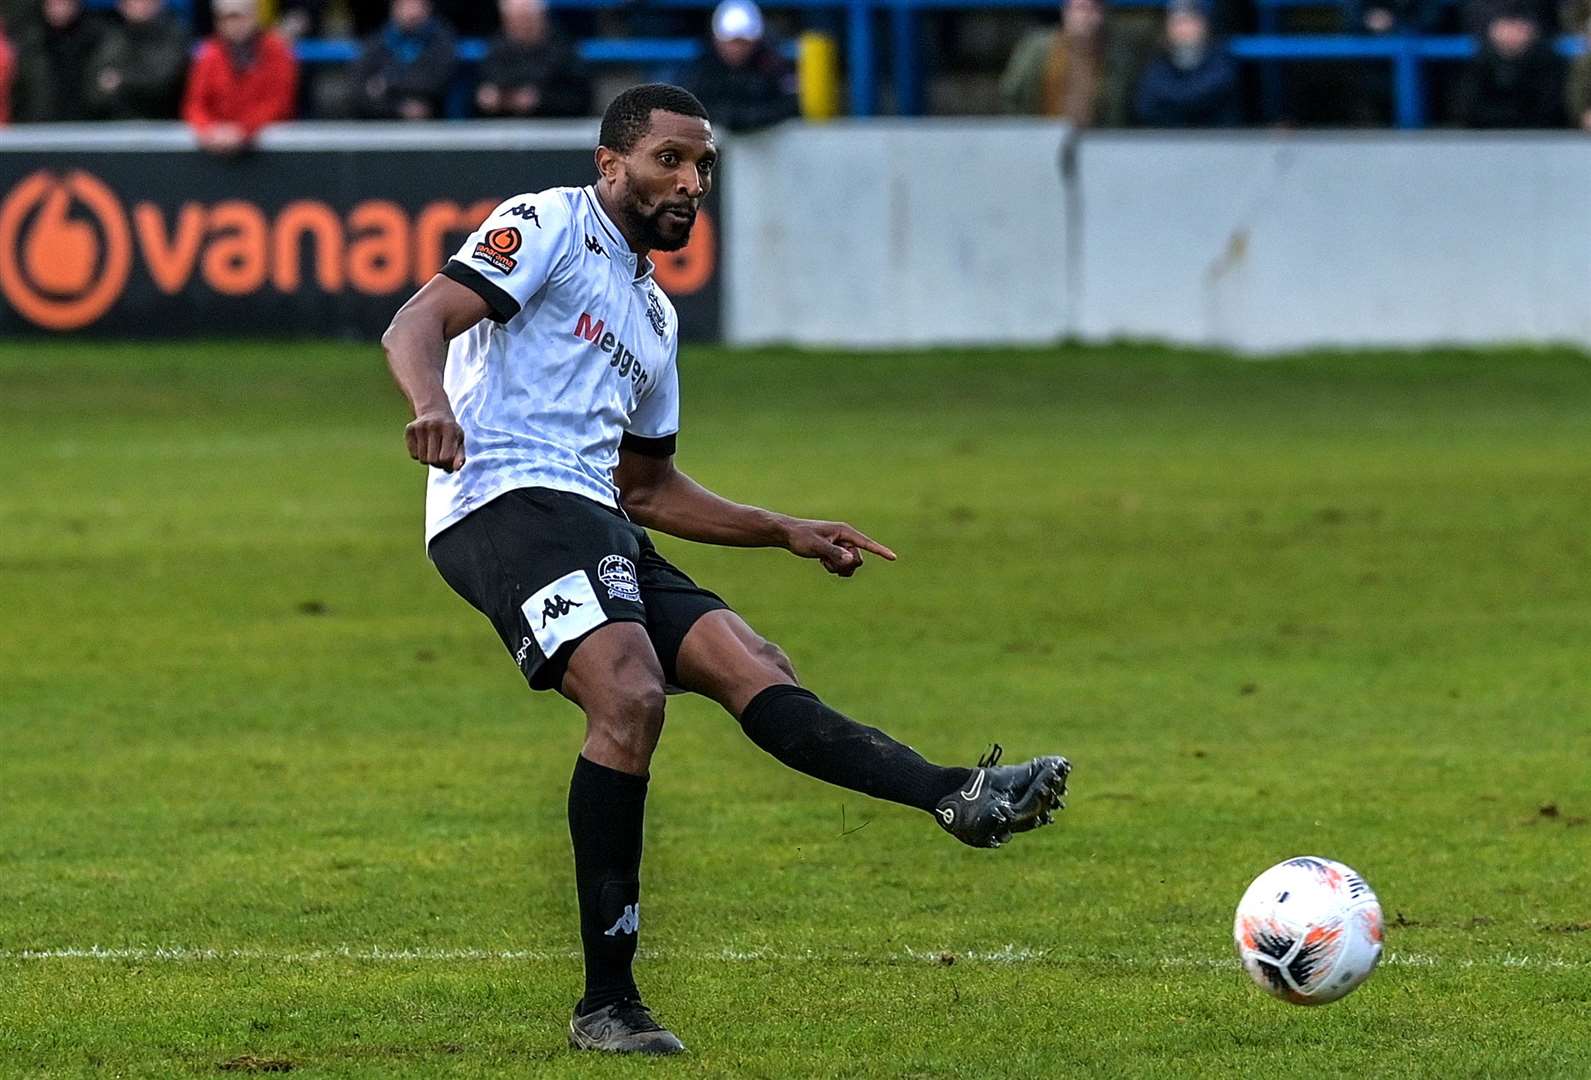 Tyrone Sterling scored his first goal of the season in the first half. Picture: Stuart Brock